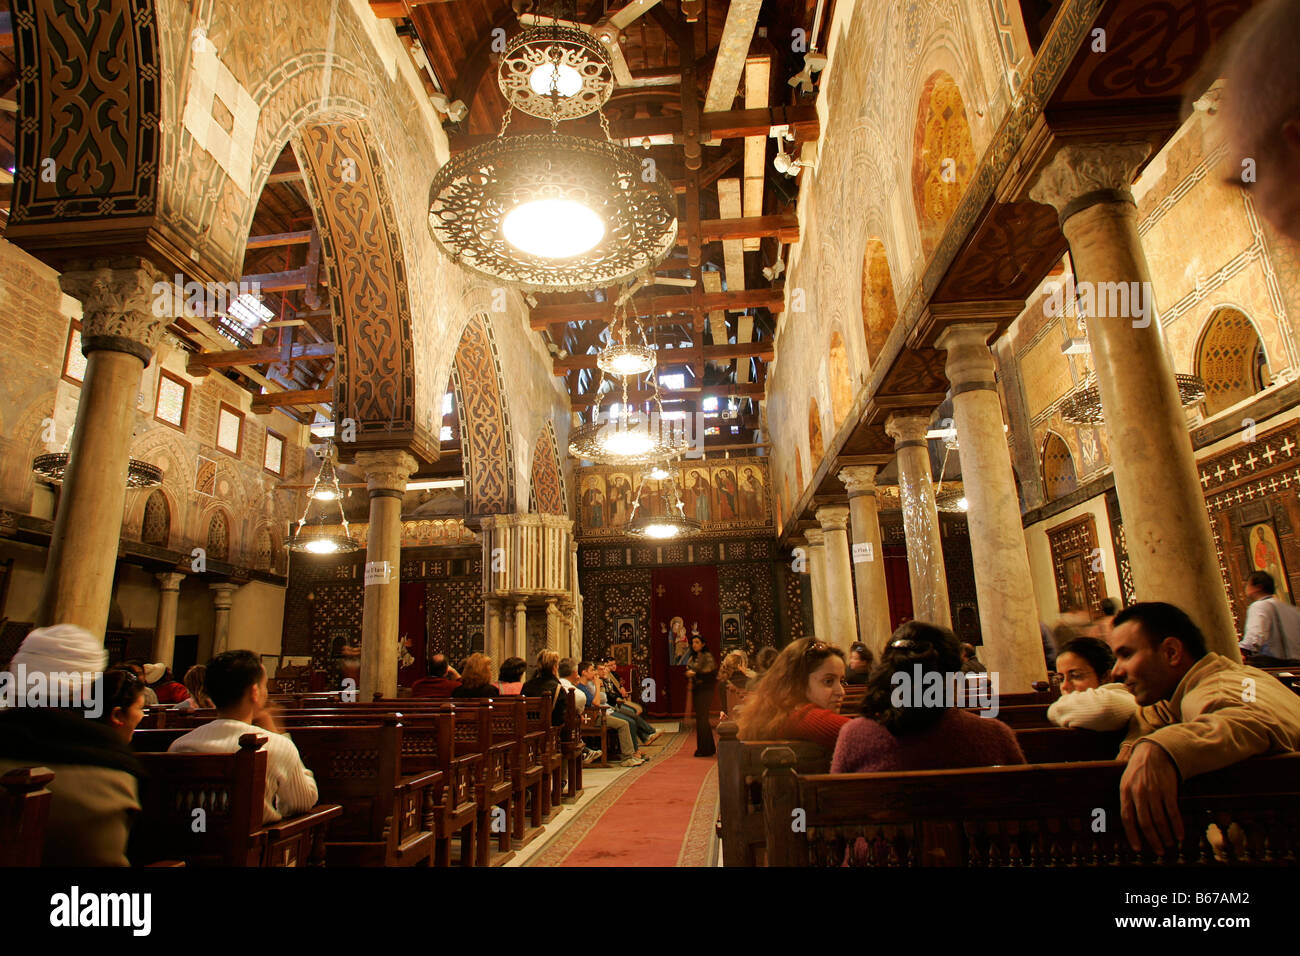 The Hanging Church in Cairo, Egypt. Saint Virgin Mary's Coptic Orthodox Church also known as the Hanging Church (El Muallaqa) Stock Photo